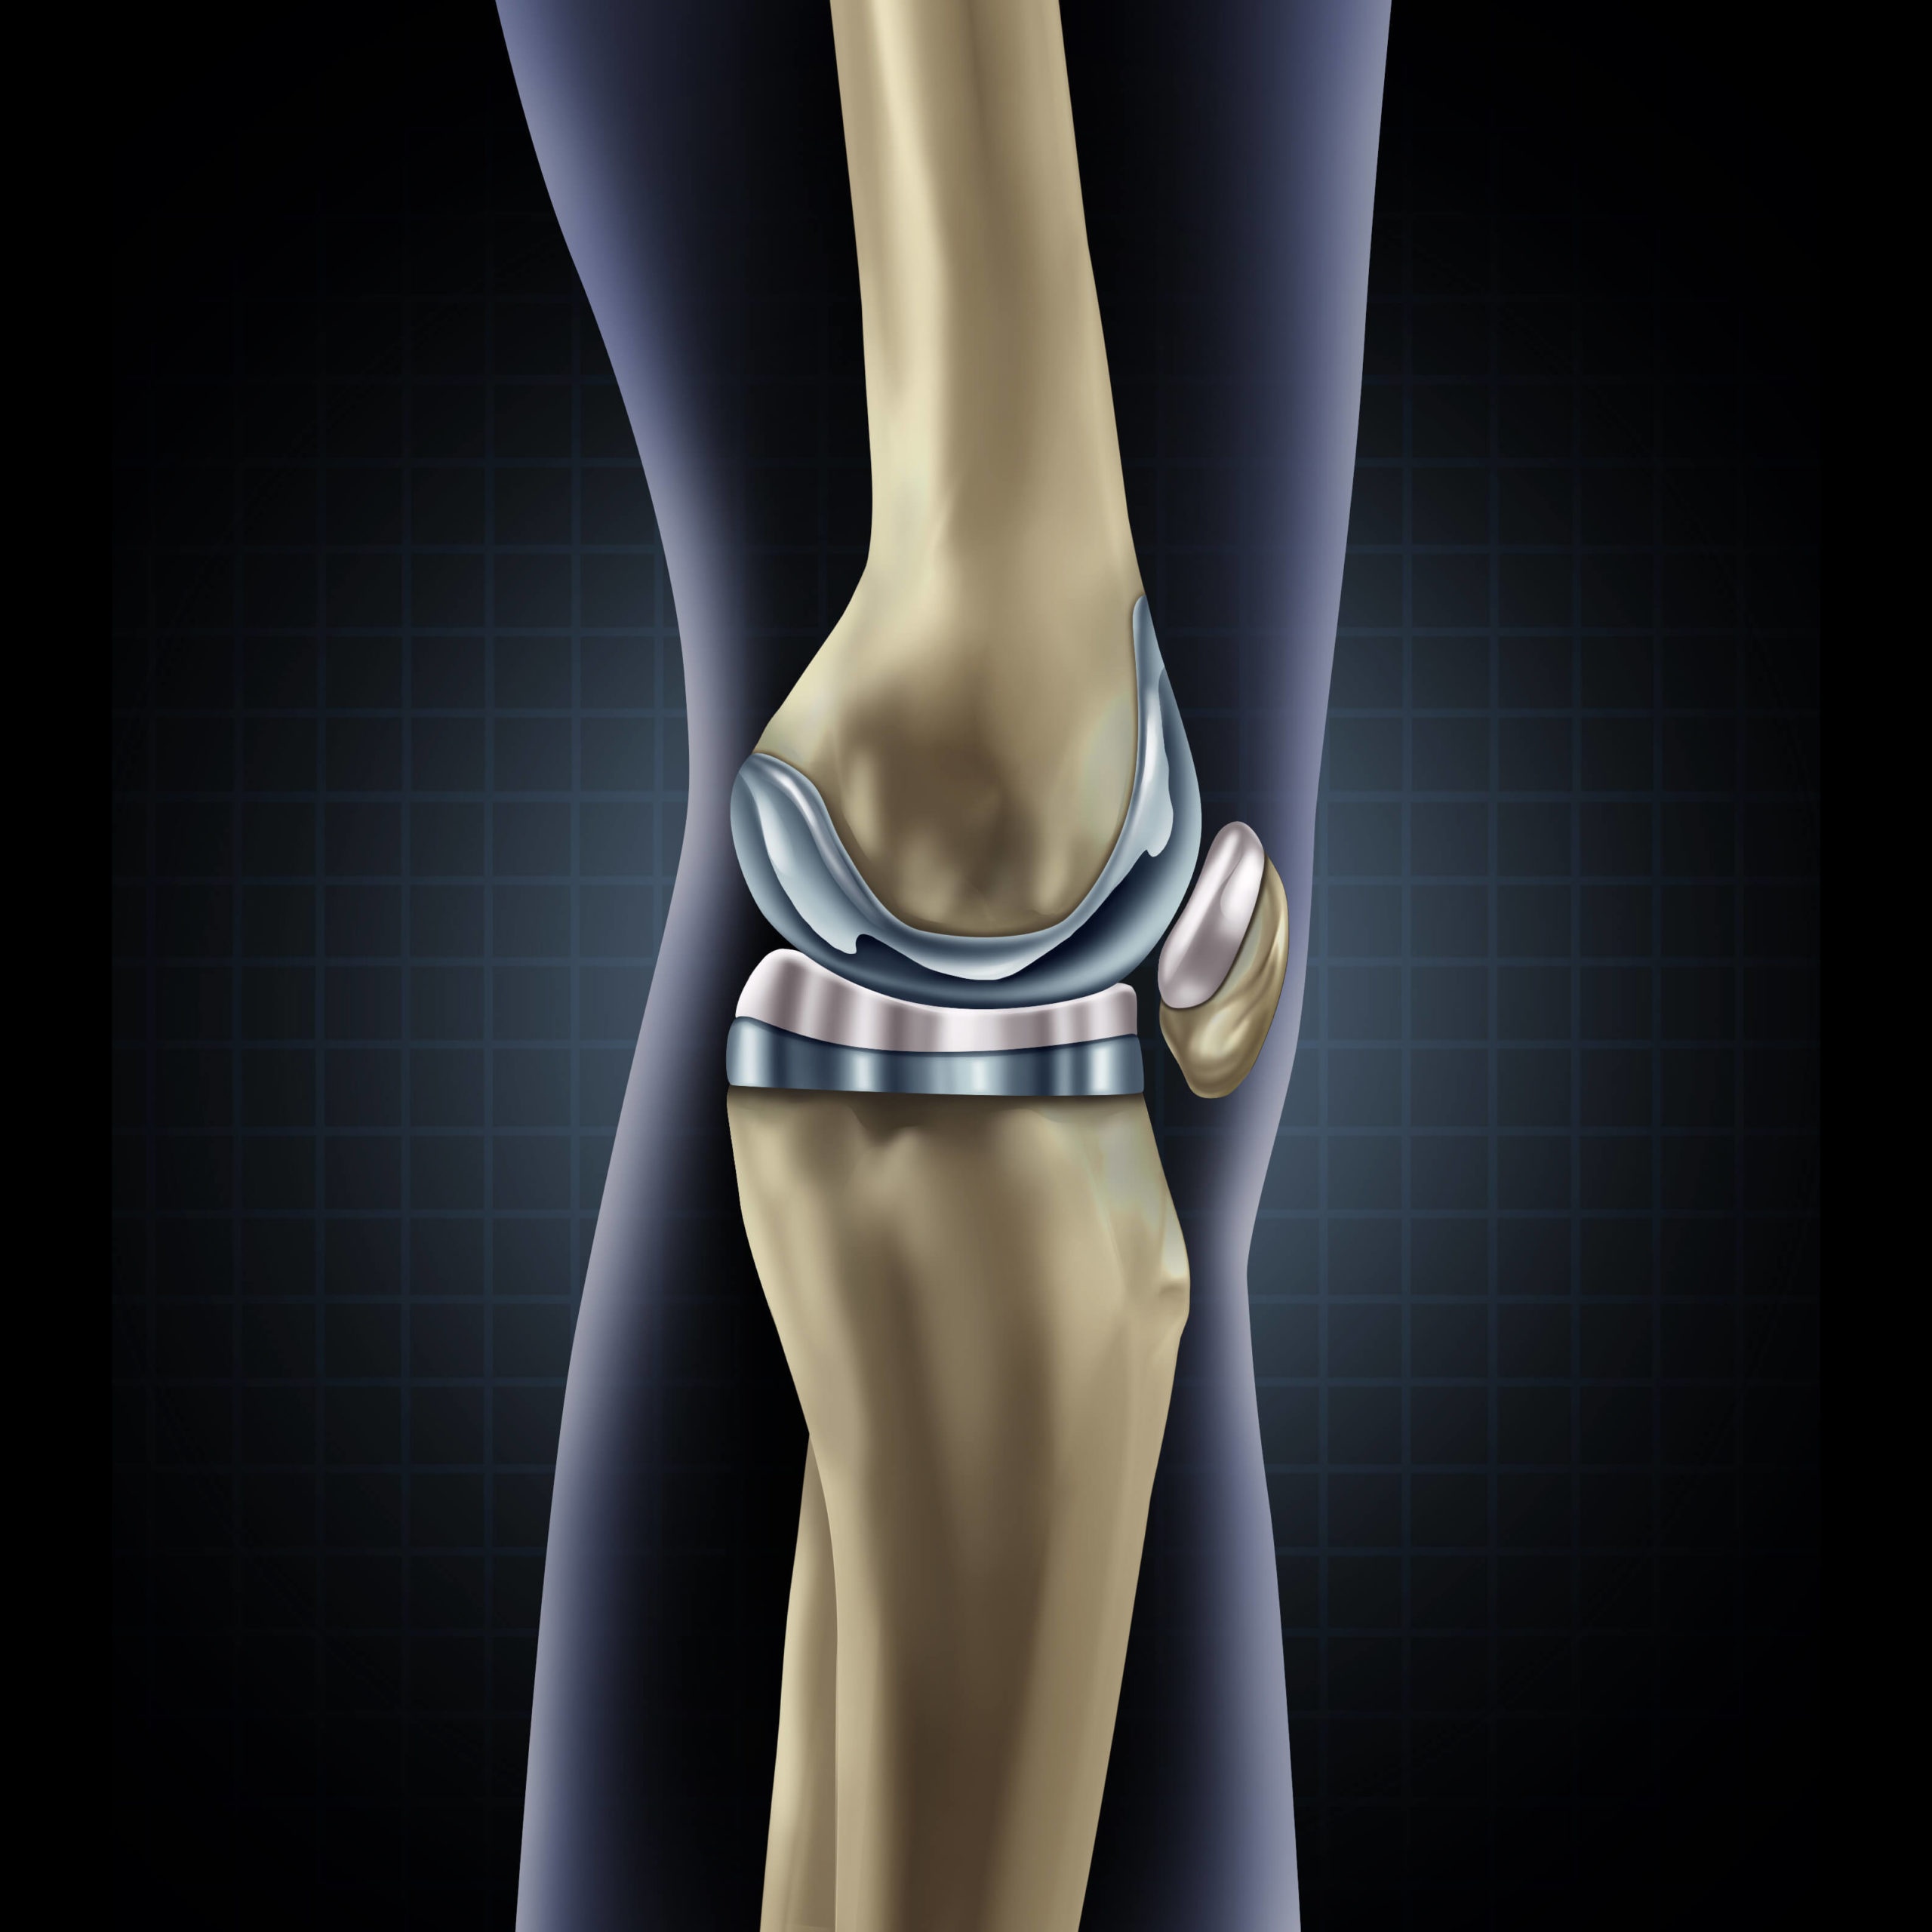 Photograph of the knee joint